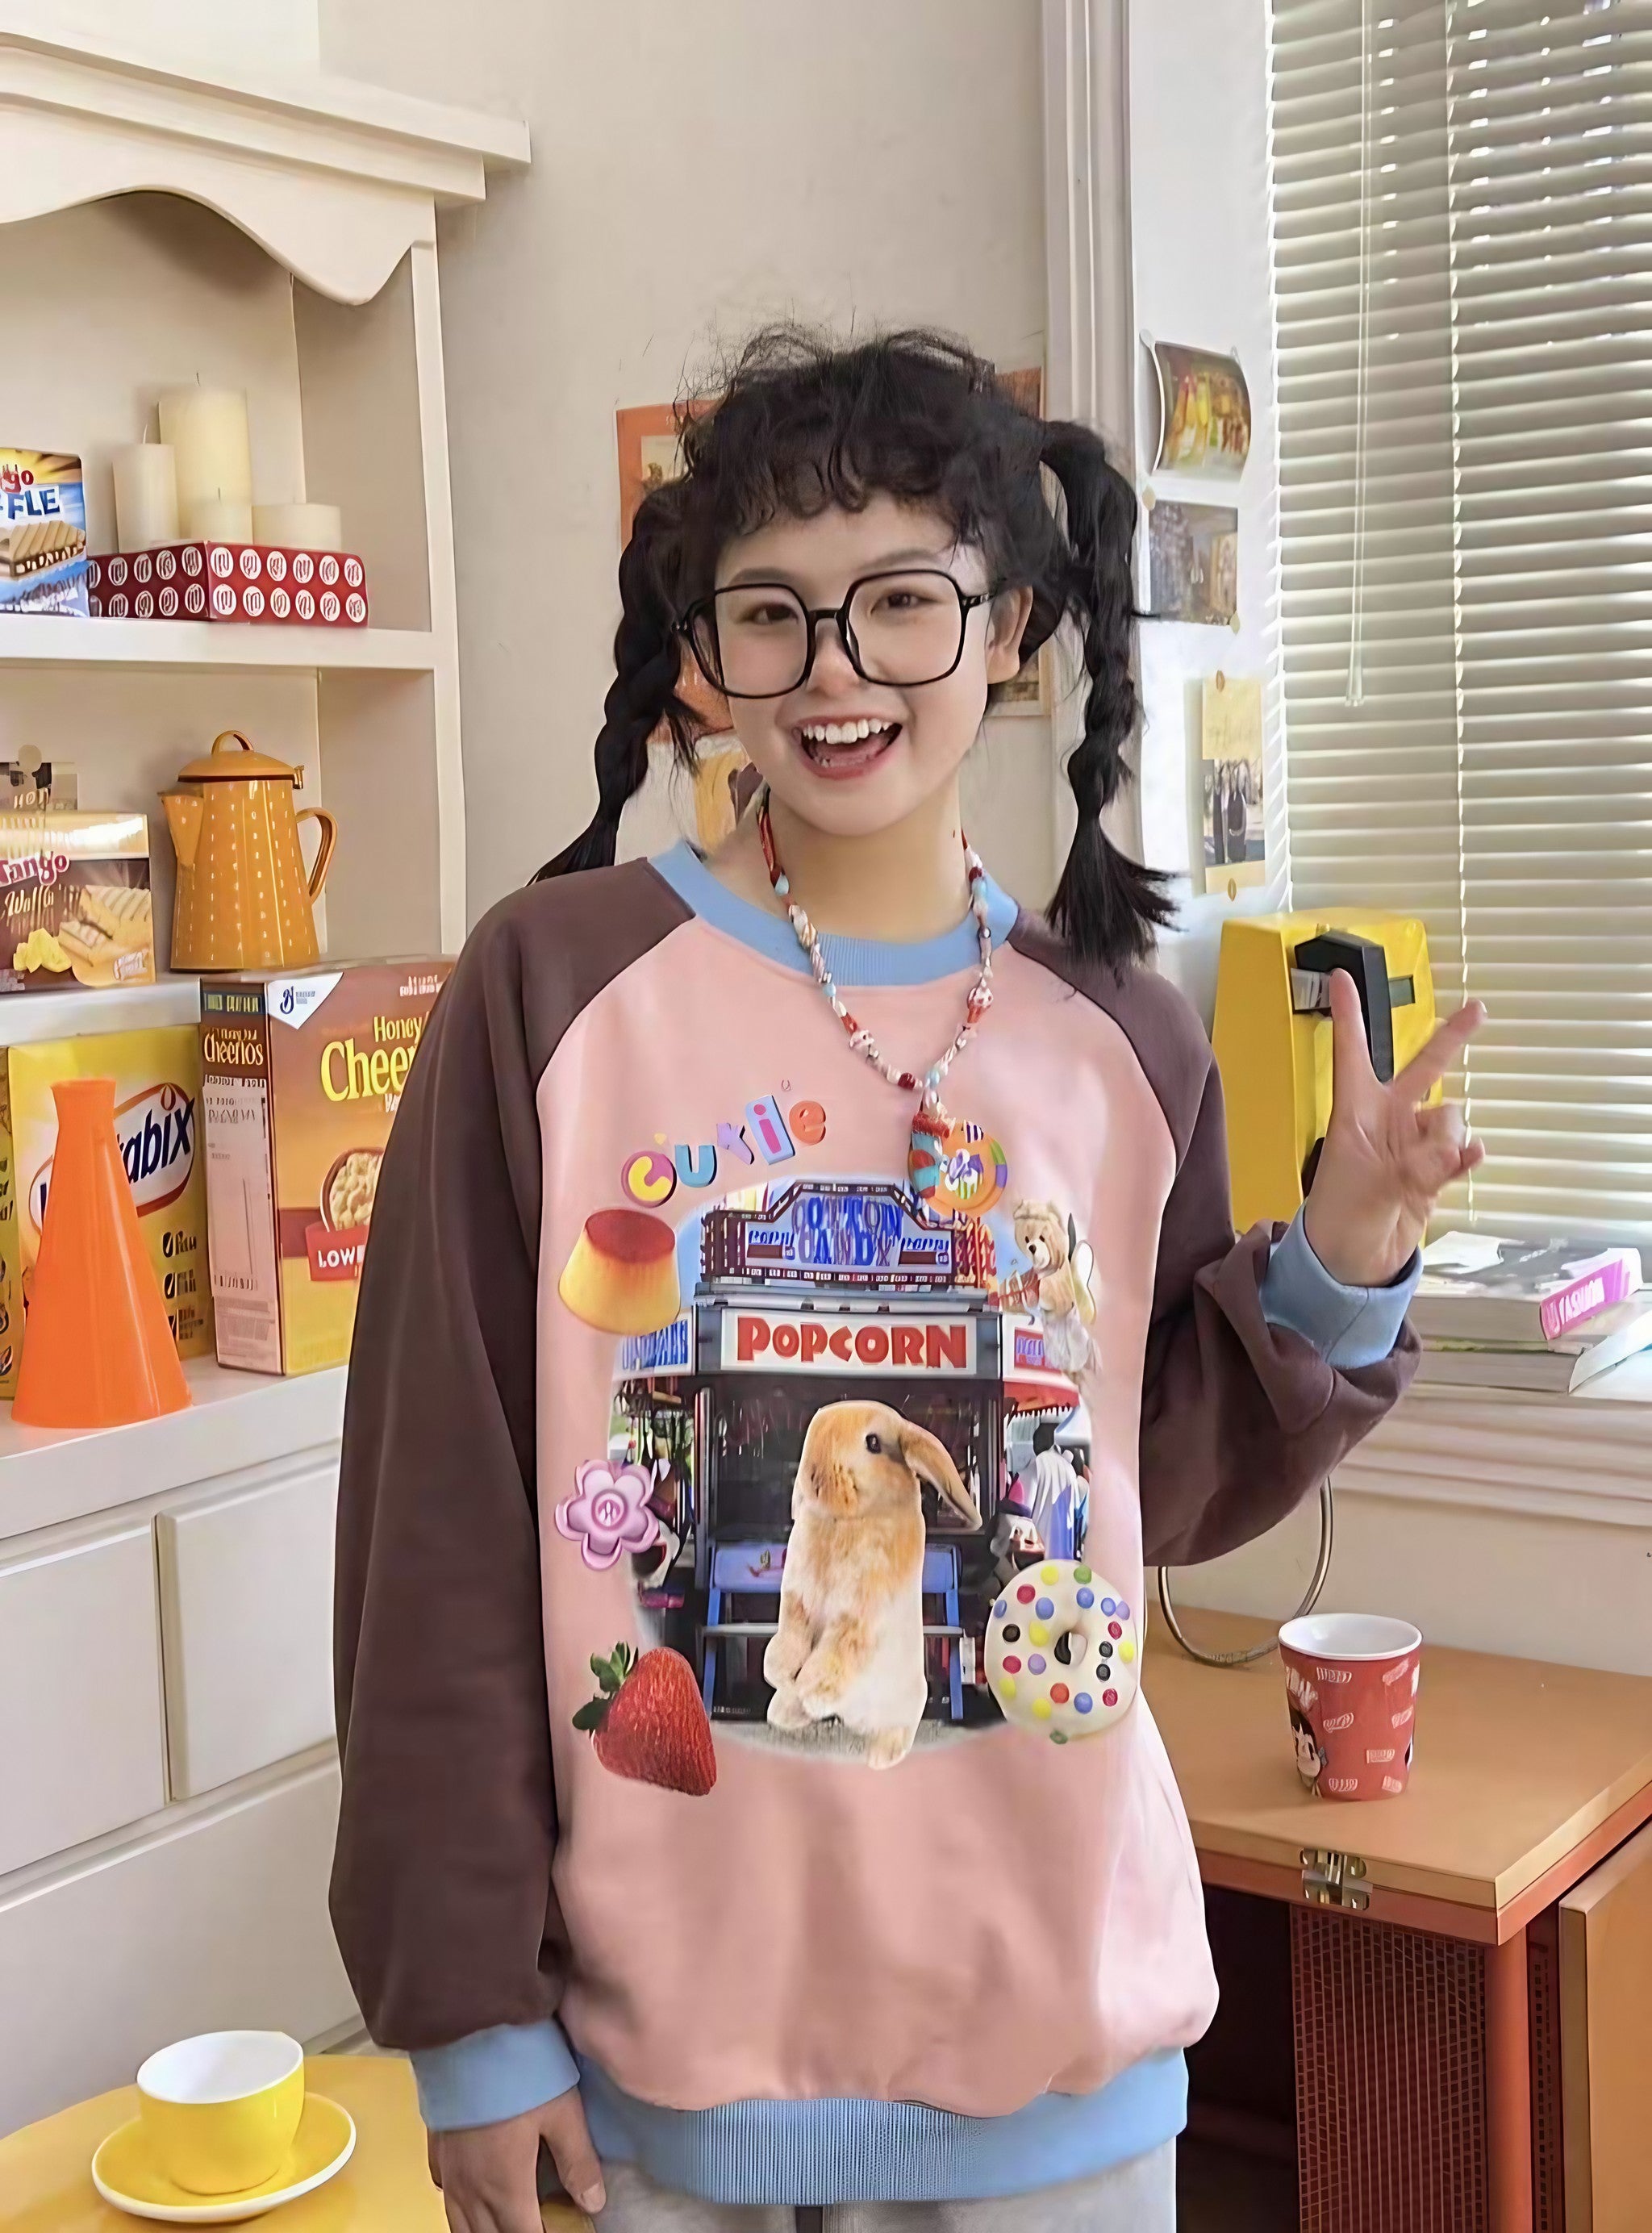 A bespectacled girl modeling a Gen Z aesthetic sweater with a rabbit print